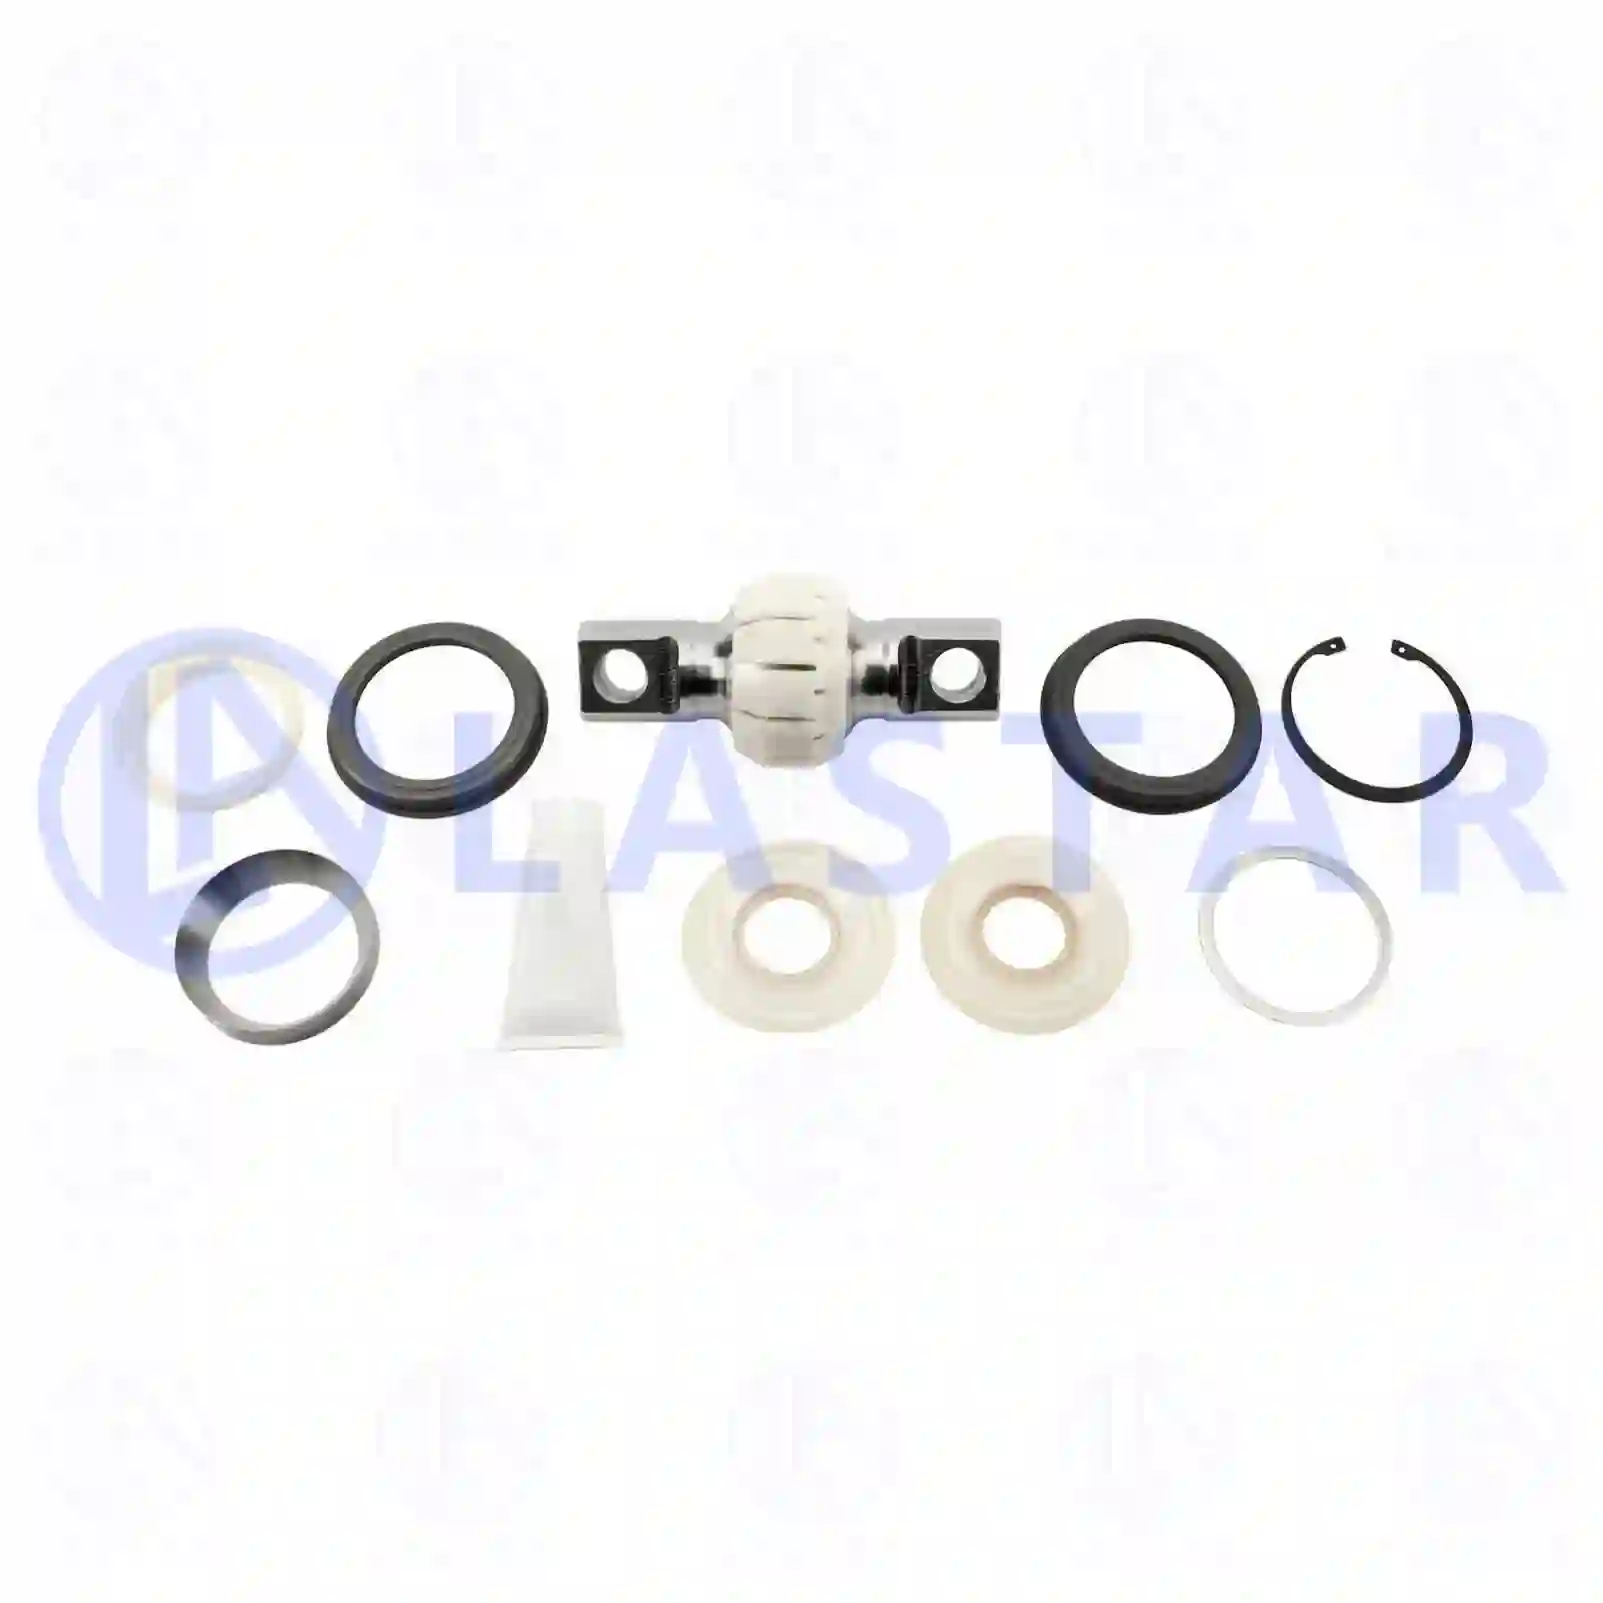 Repair kit, v-stay, 77729072, 81432706083, 81953016133, 273375, 2733756 ||  77729072 Lastar Spare Part | Truck Spare Parts, Auotomotive Spare Parts Repair kit, v-stay, 77729072, 81432706083, 81953016133, 273375, 2733756 ||  77729072 Lastar Spare Part | Truck Spare Parts, Auotomotive Spare Parts